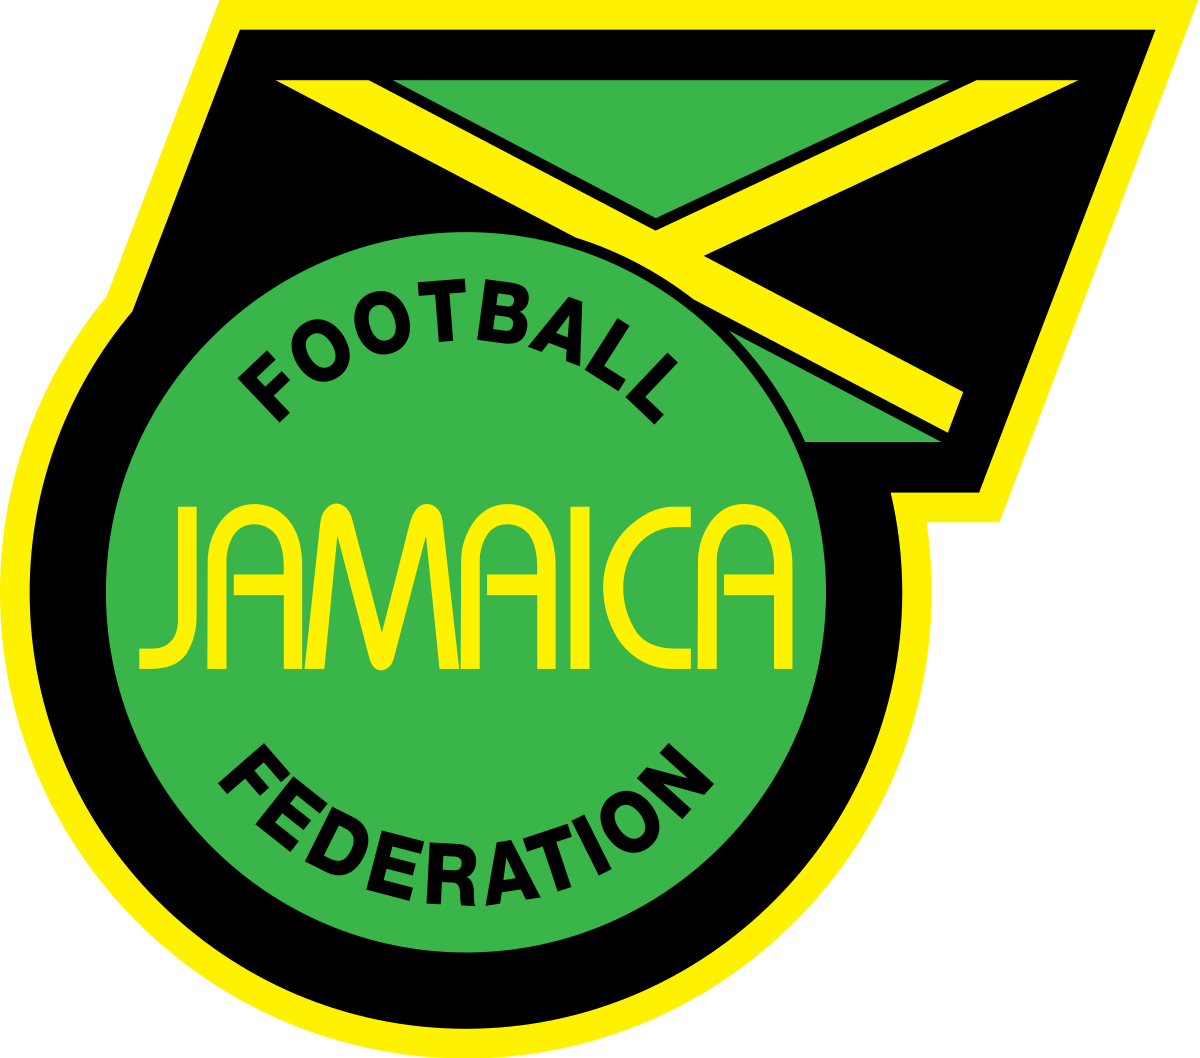 The+logo+for+the+Jamaican+Football+Federation.+This+logo+is+used+for+all+nation+teams+and+has+been+in+use+since+1910.